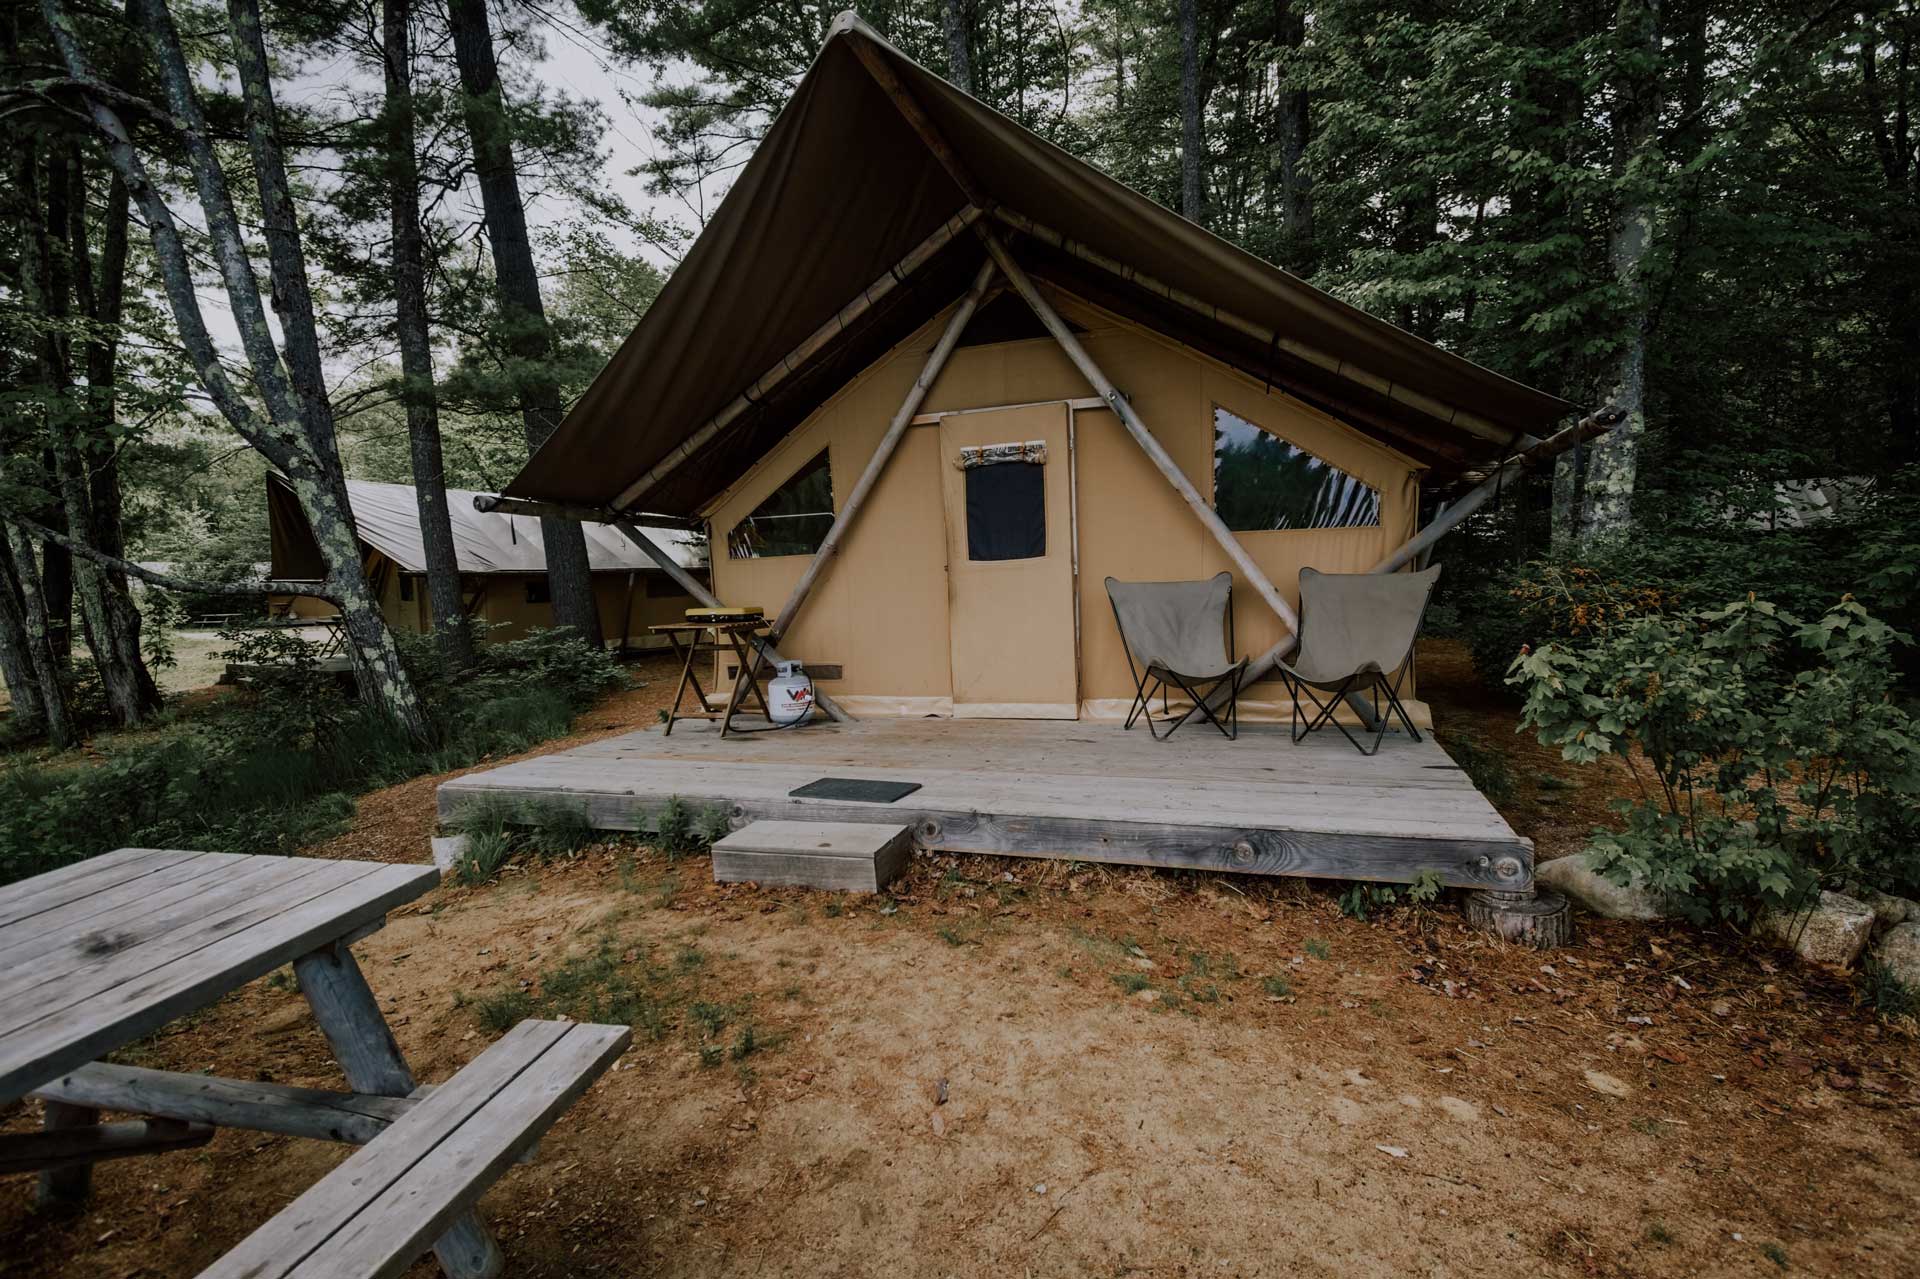 Glamping in a cabin in the woods